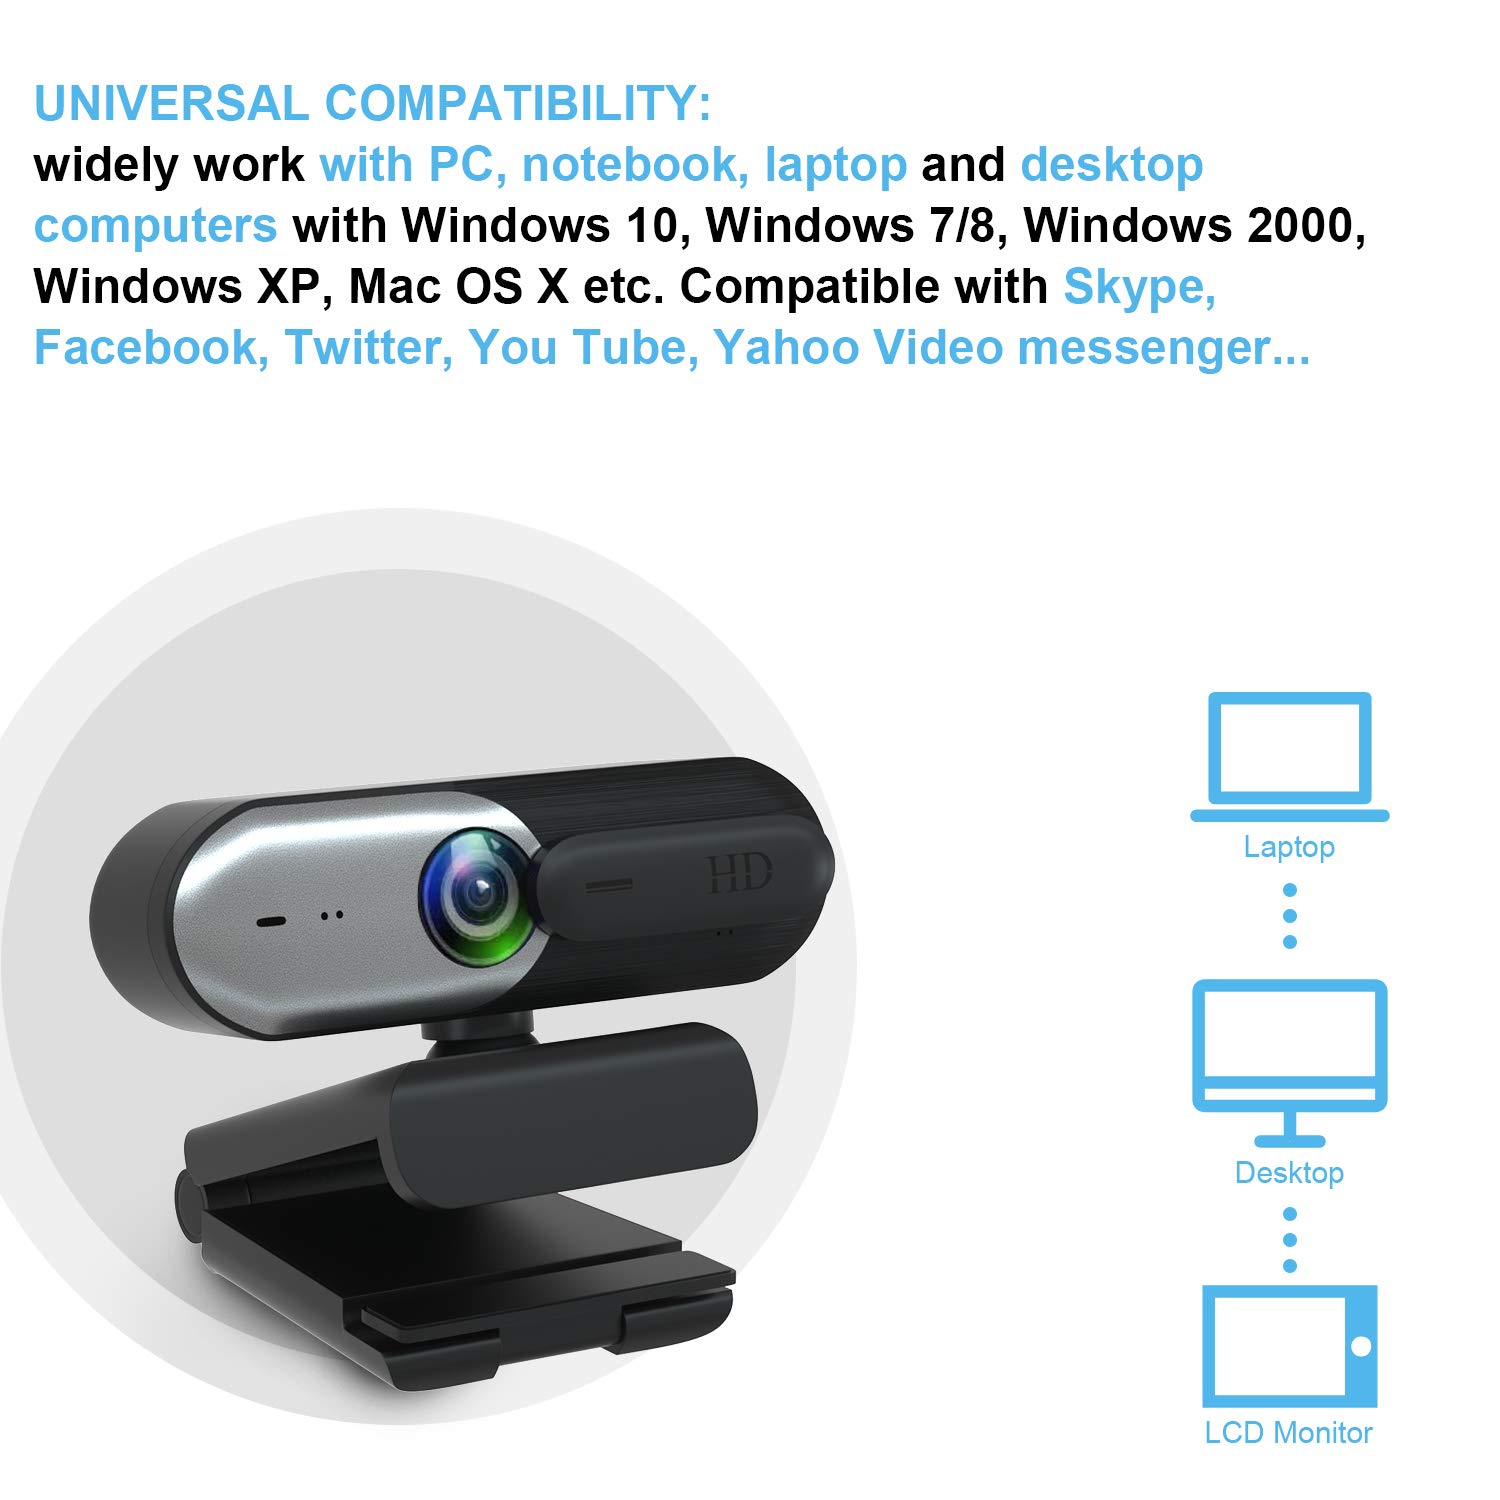 EACH AutoFocus Full HD Webcam 1080P with Privacy Shutter - with Dual Digital Microphone - CA602 Black Grey USB Computer Camera for PC Laptop Desktop Mac Video Calling, Conferencing Skype YouTube